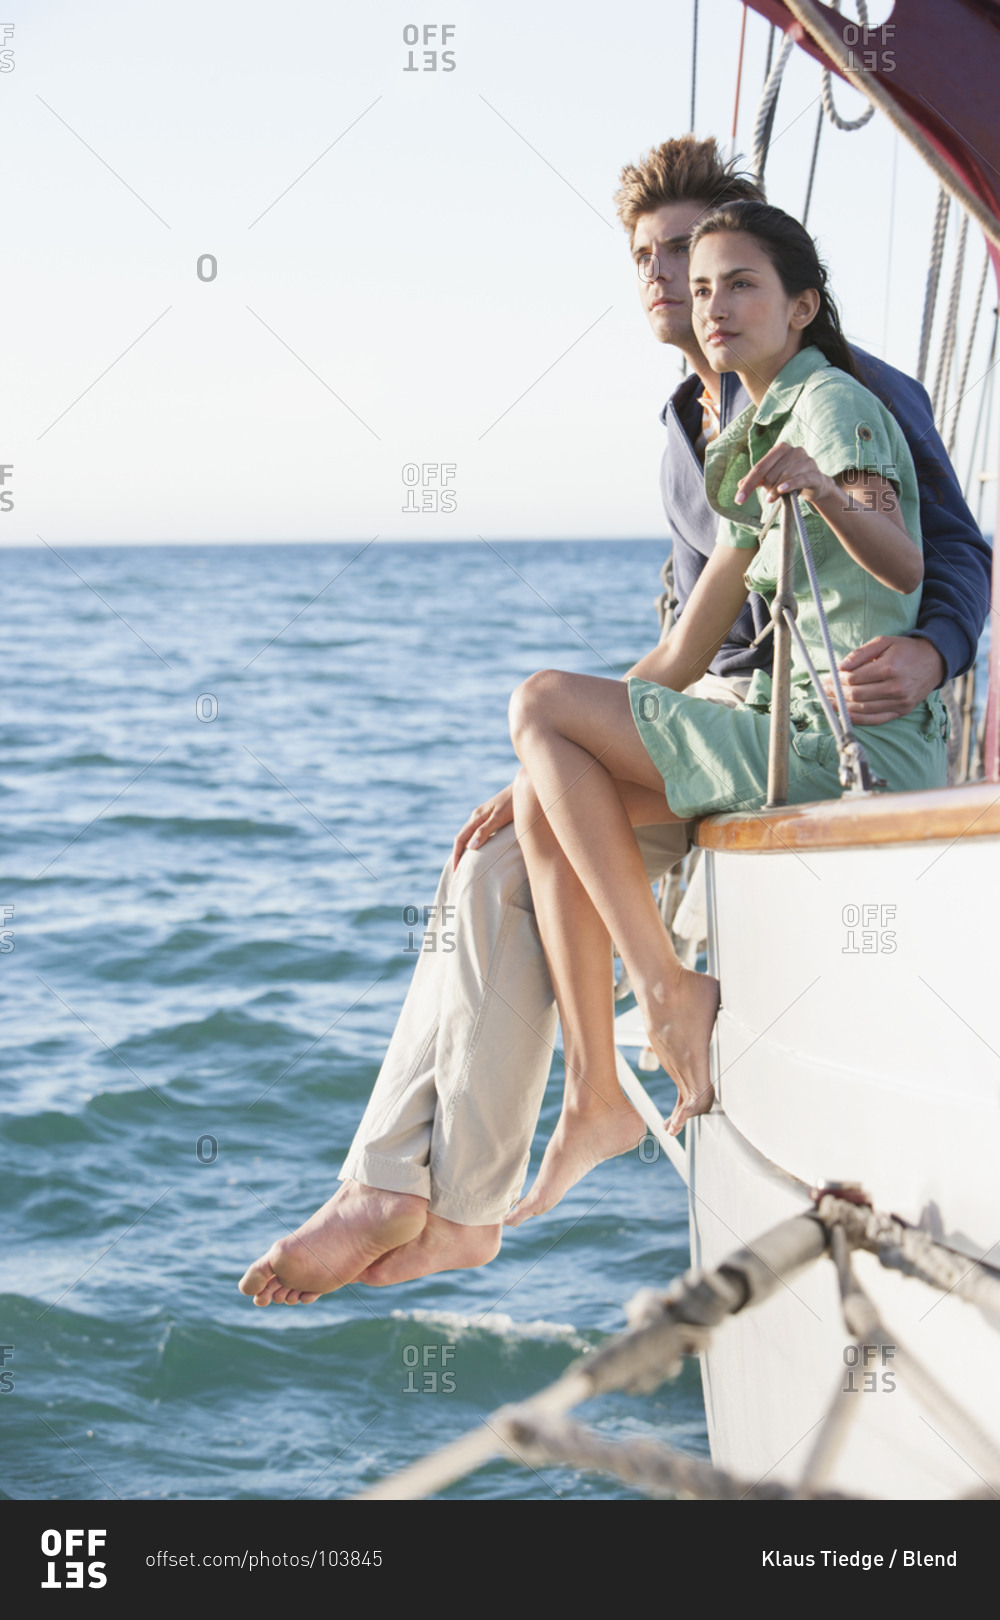 Couple relaxing on sailboat